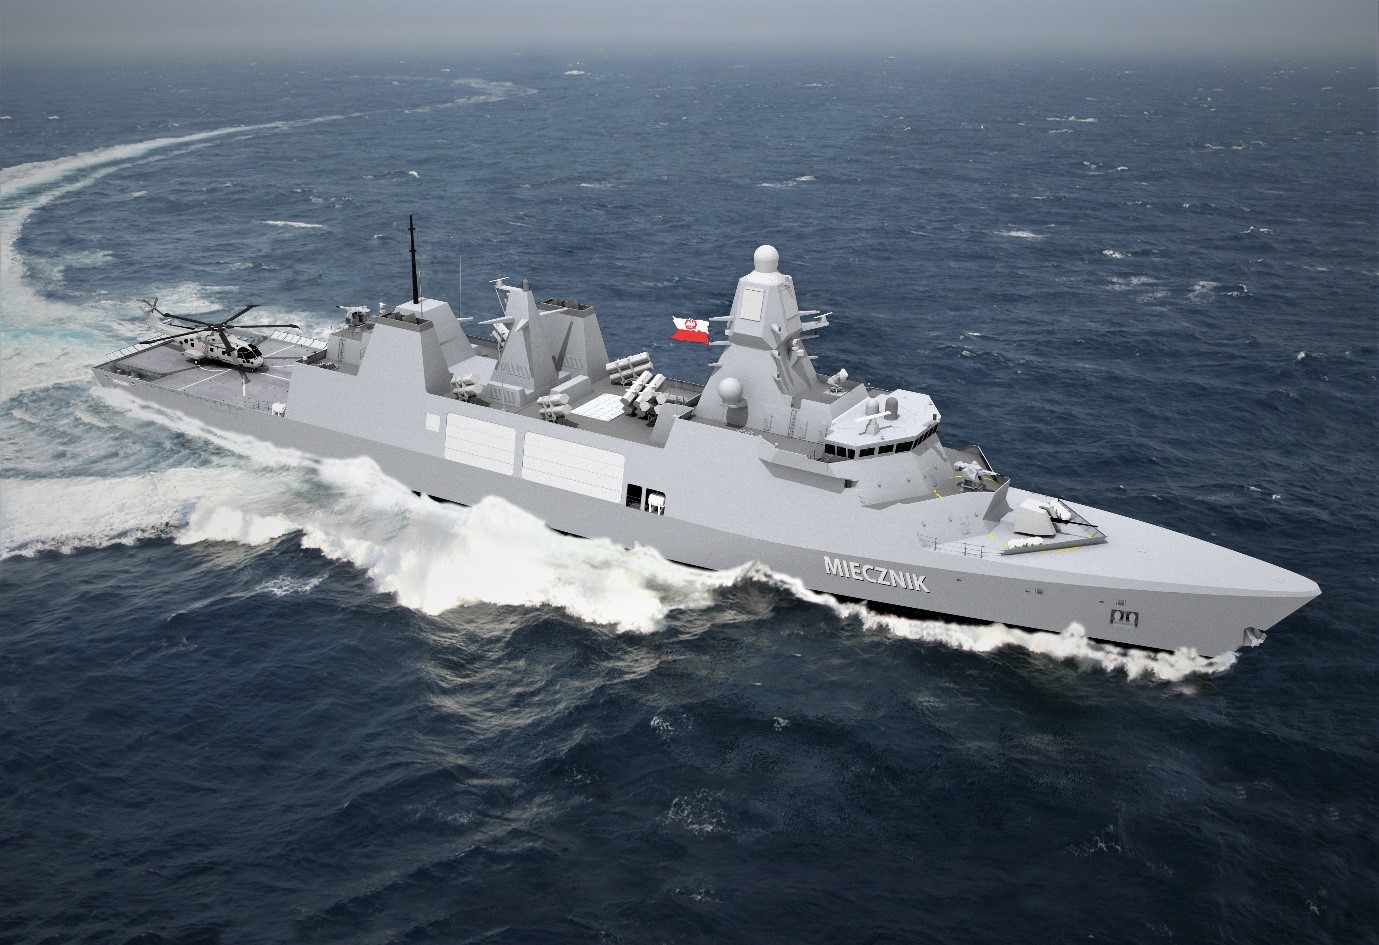 THALES to Deliver Combat Management System and Sensor Suite to Polish Miecznik Frigates